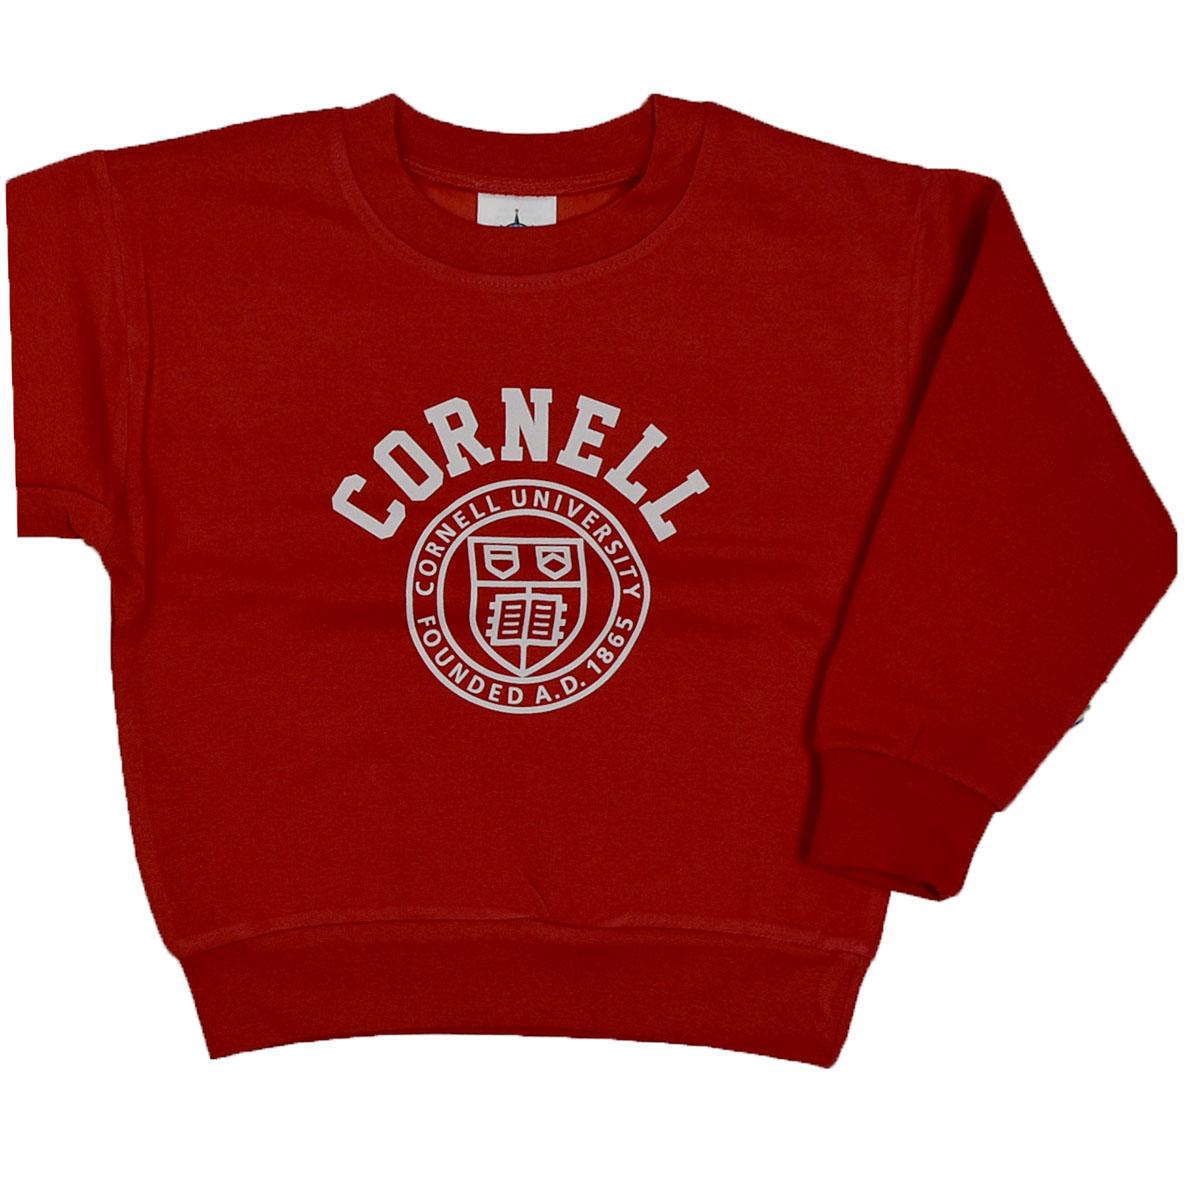 Toddler Arched Cornell Over Seal